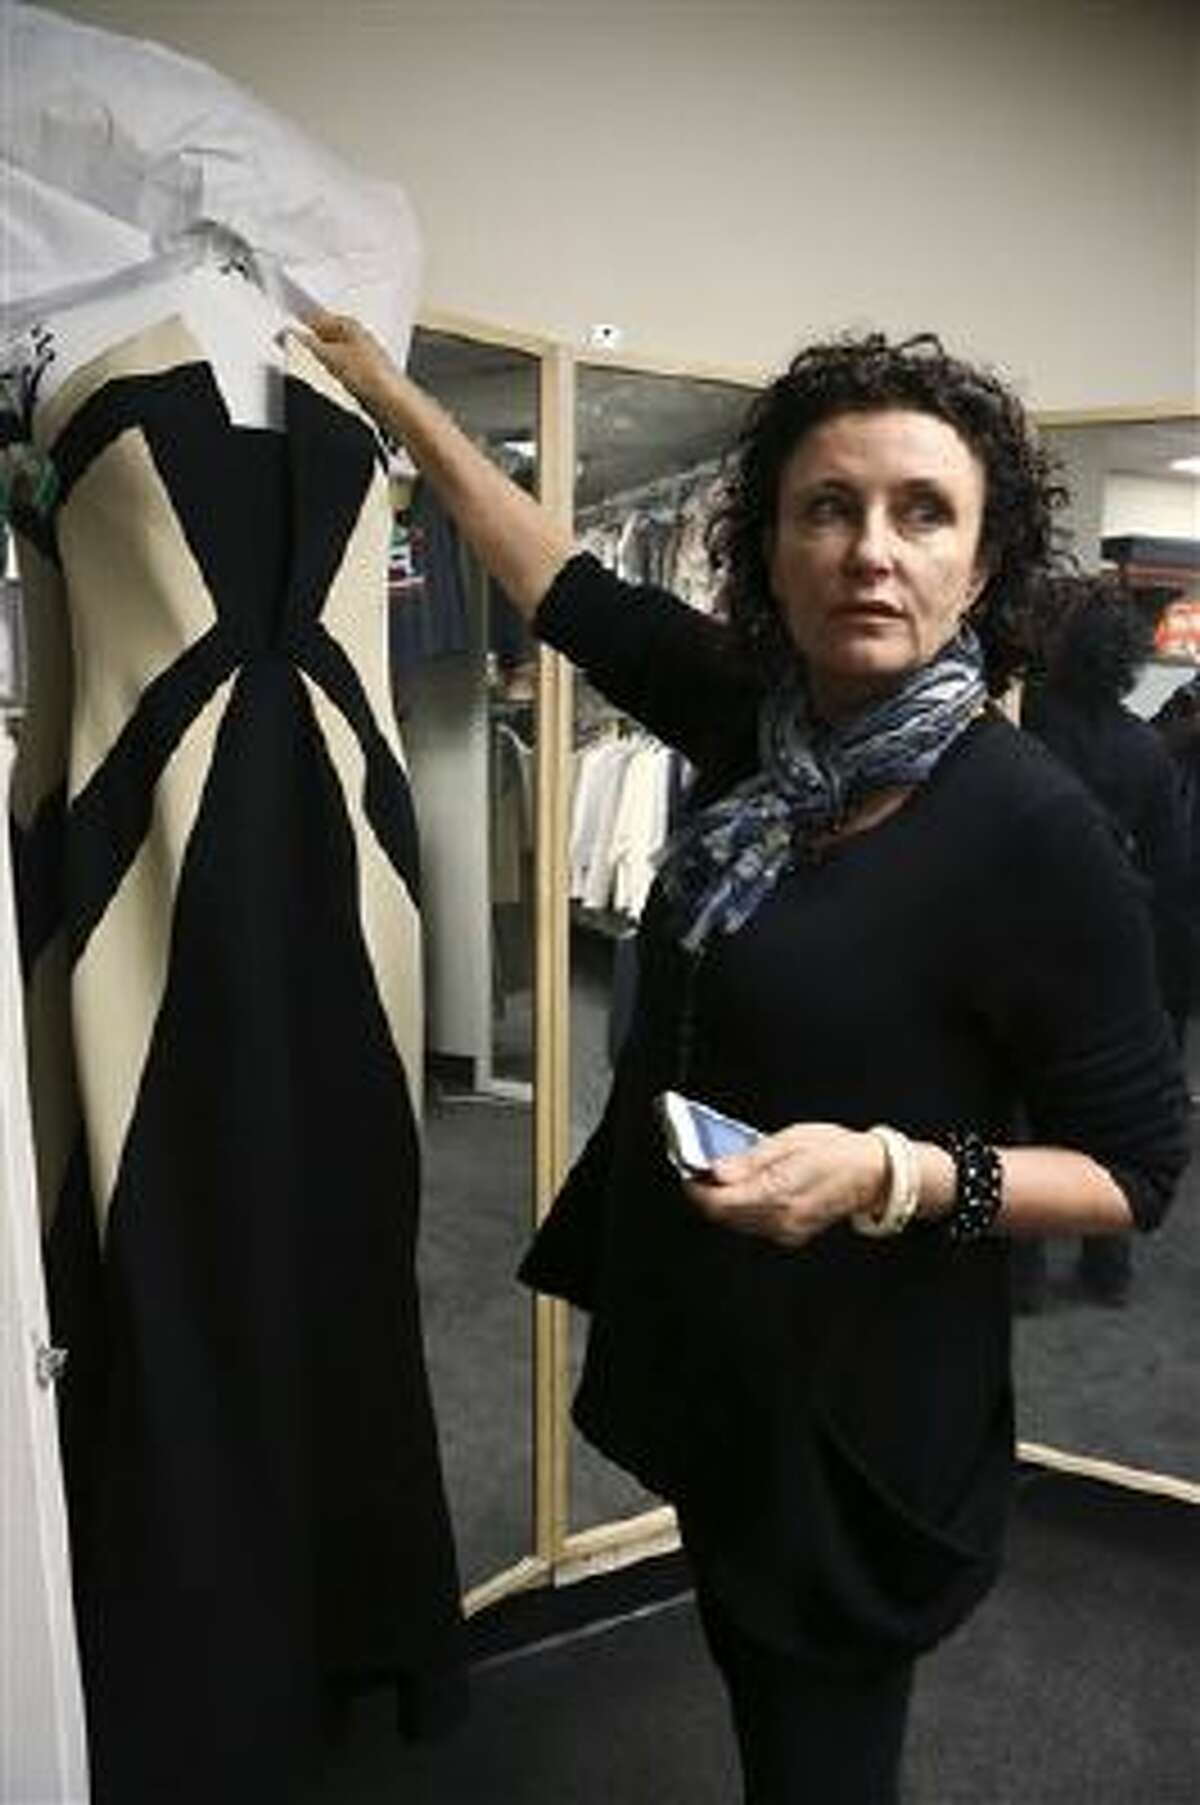 In this Nov. 11, 2013 image released by ABC, Lyn Paolo, costume designer holds a Rubin Singer gown worn by Kerry Washington in the ABC drama series, "Scandal," in the show's wardrobe closet on the Sunset Gower lot in the Hollywood section of Los Angeles.